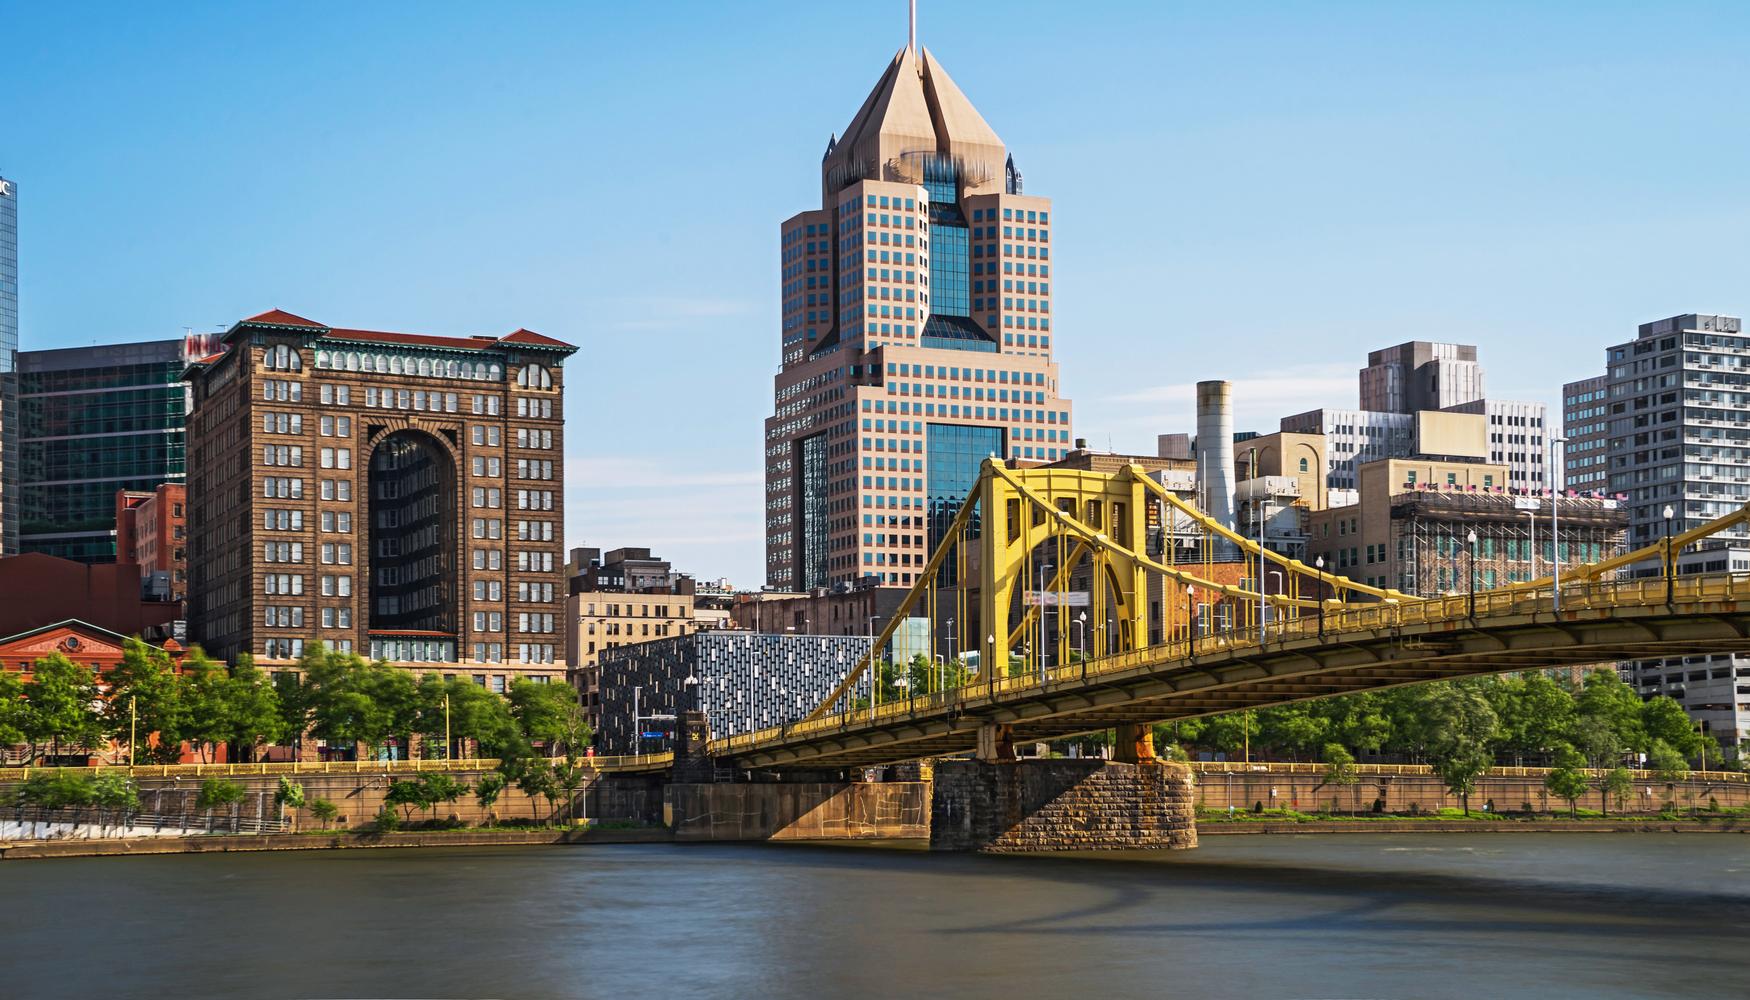 classic travel and tours pittsburgh